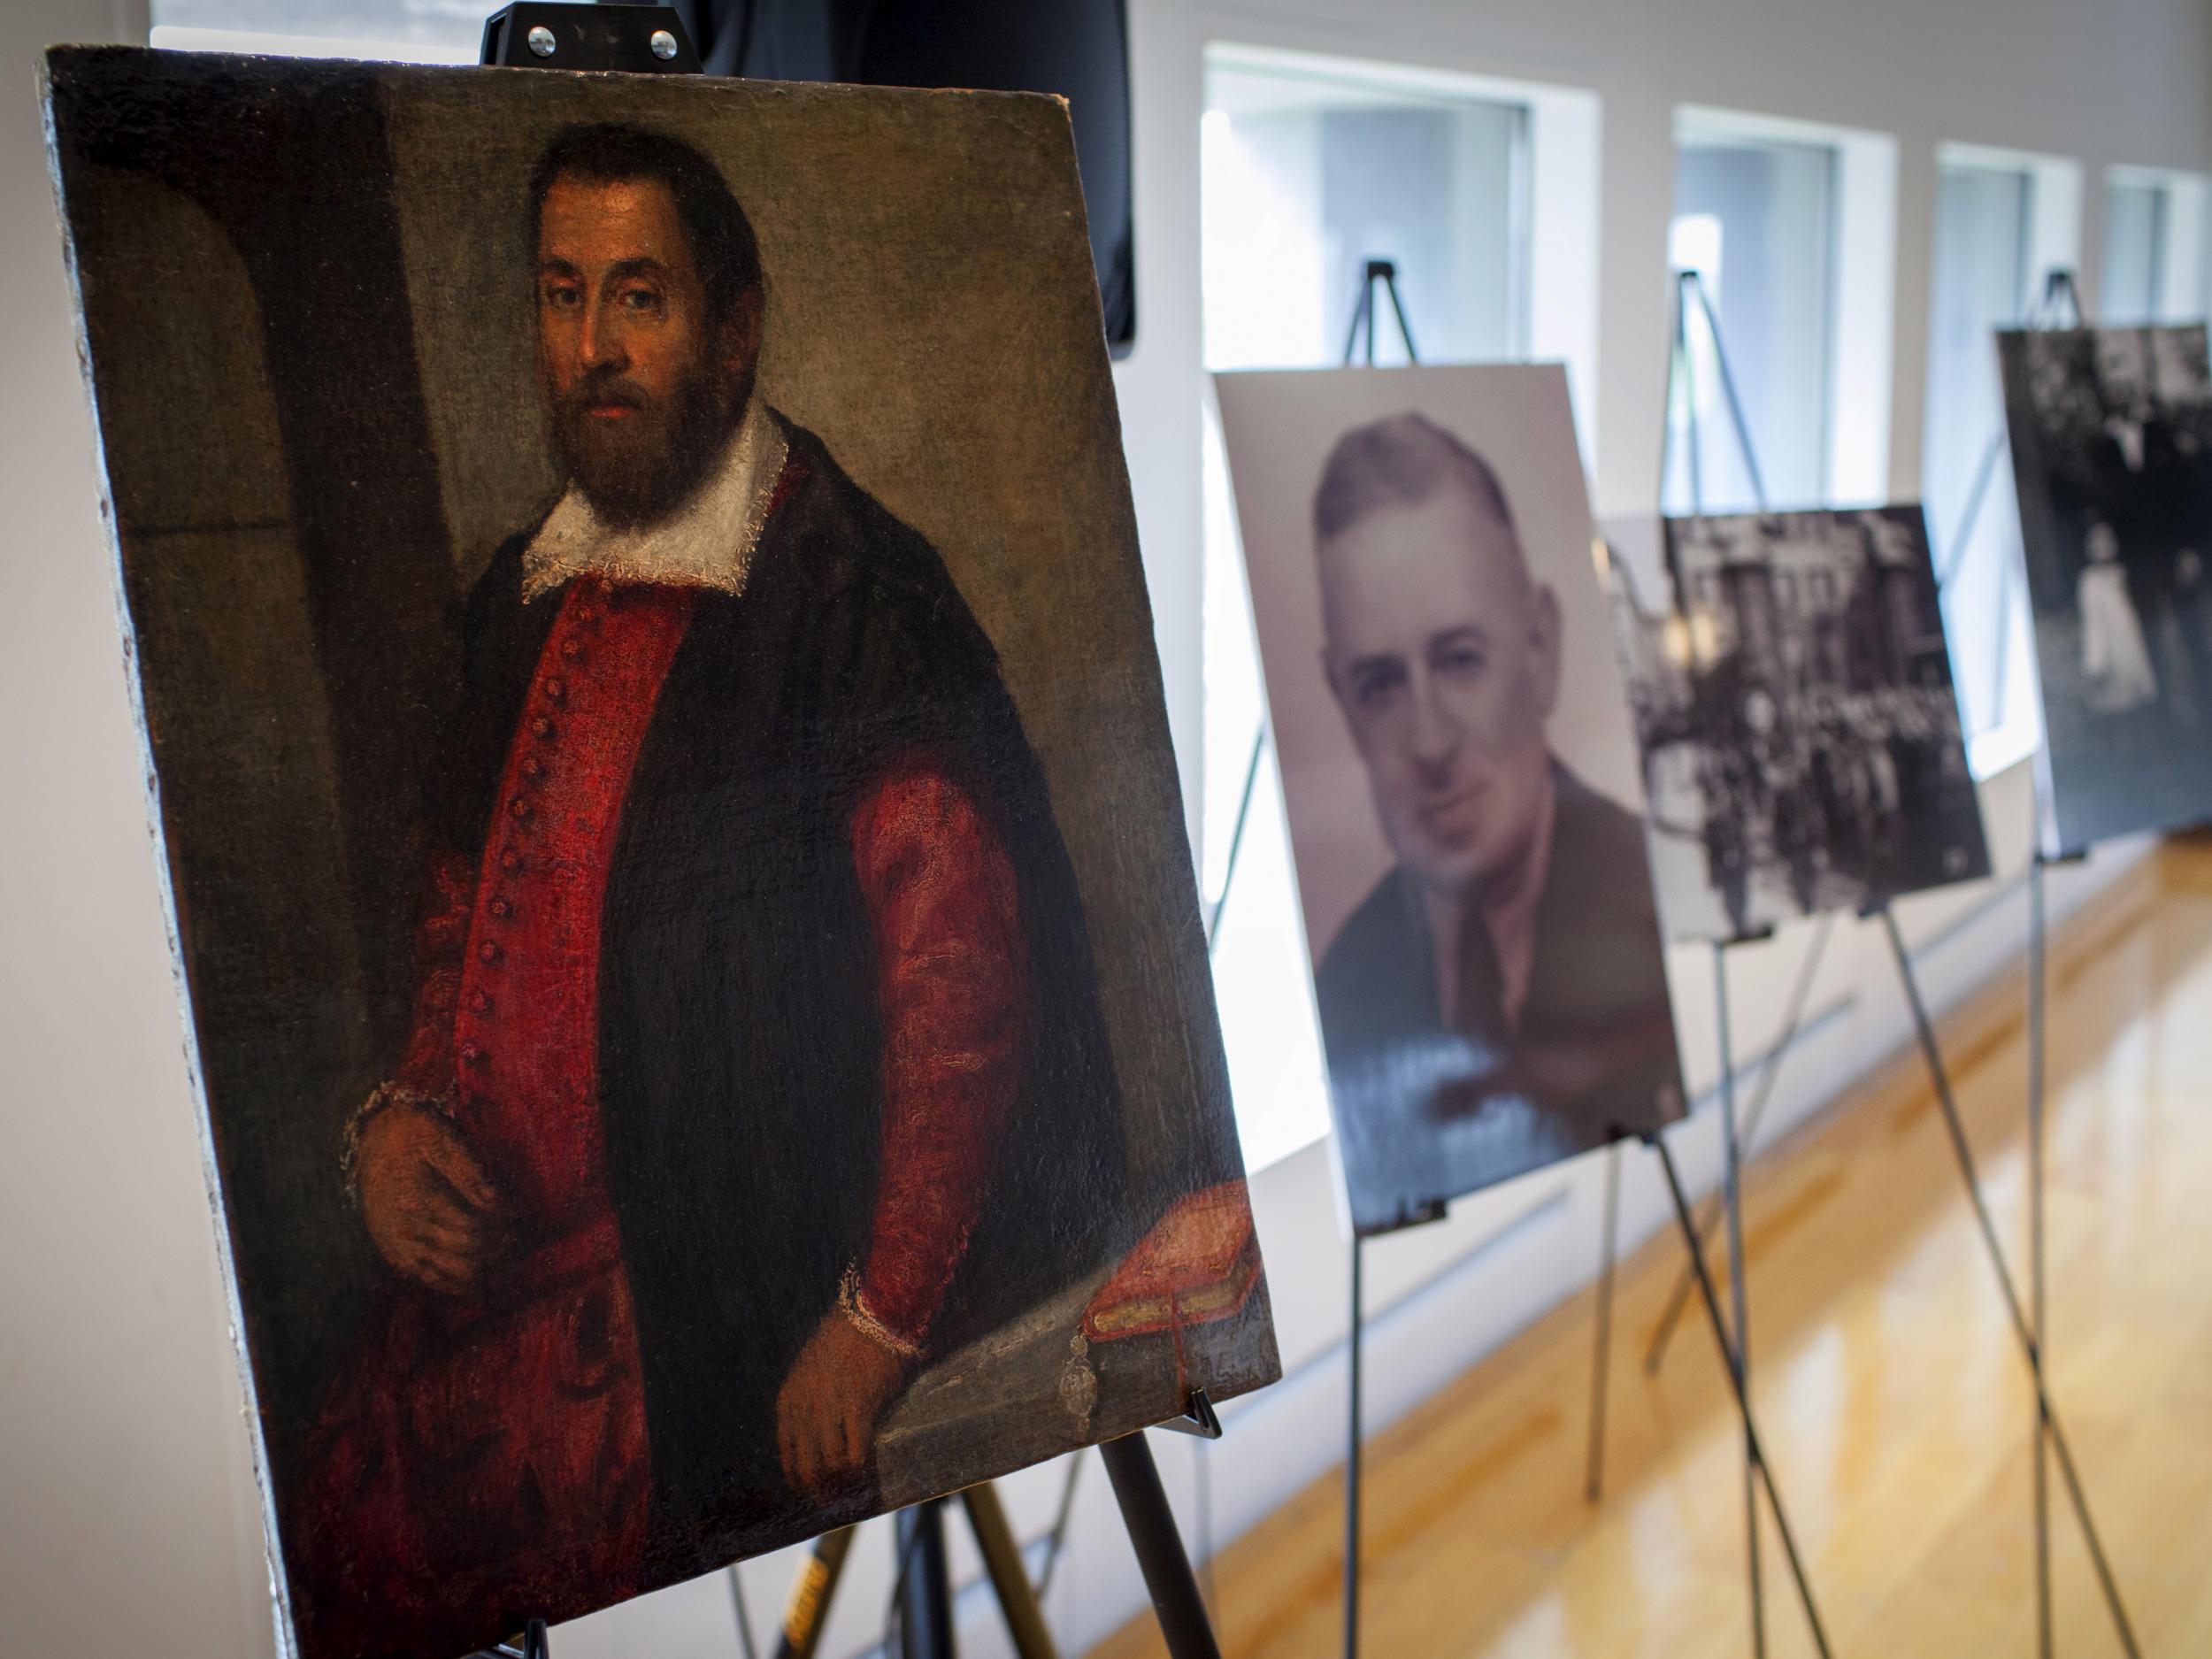 The 17th century painting 'Portrait of a Man', which belonged to German Holocaust victim Dr. August Liebmann Mayer, displayed at a ceremony at the Jewish Heritage Museum in New York